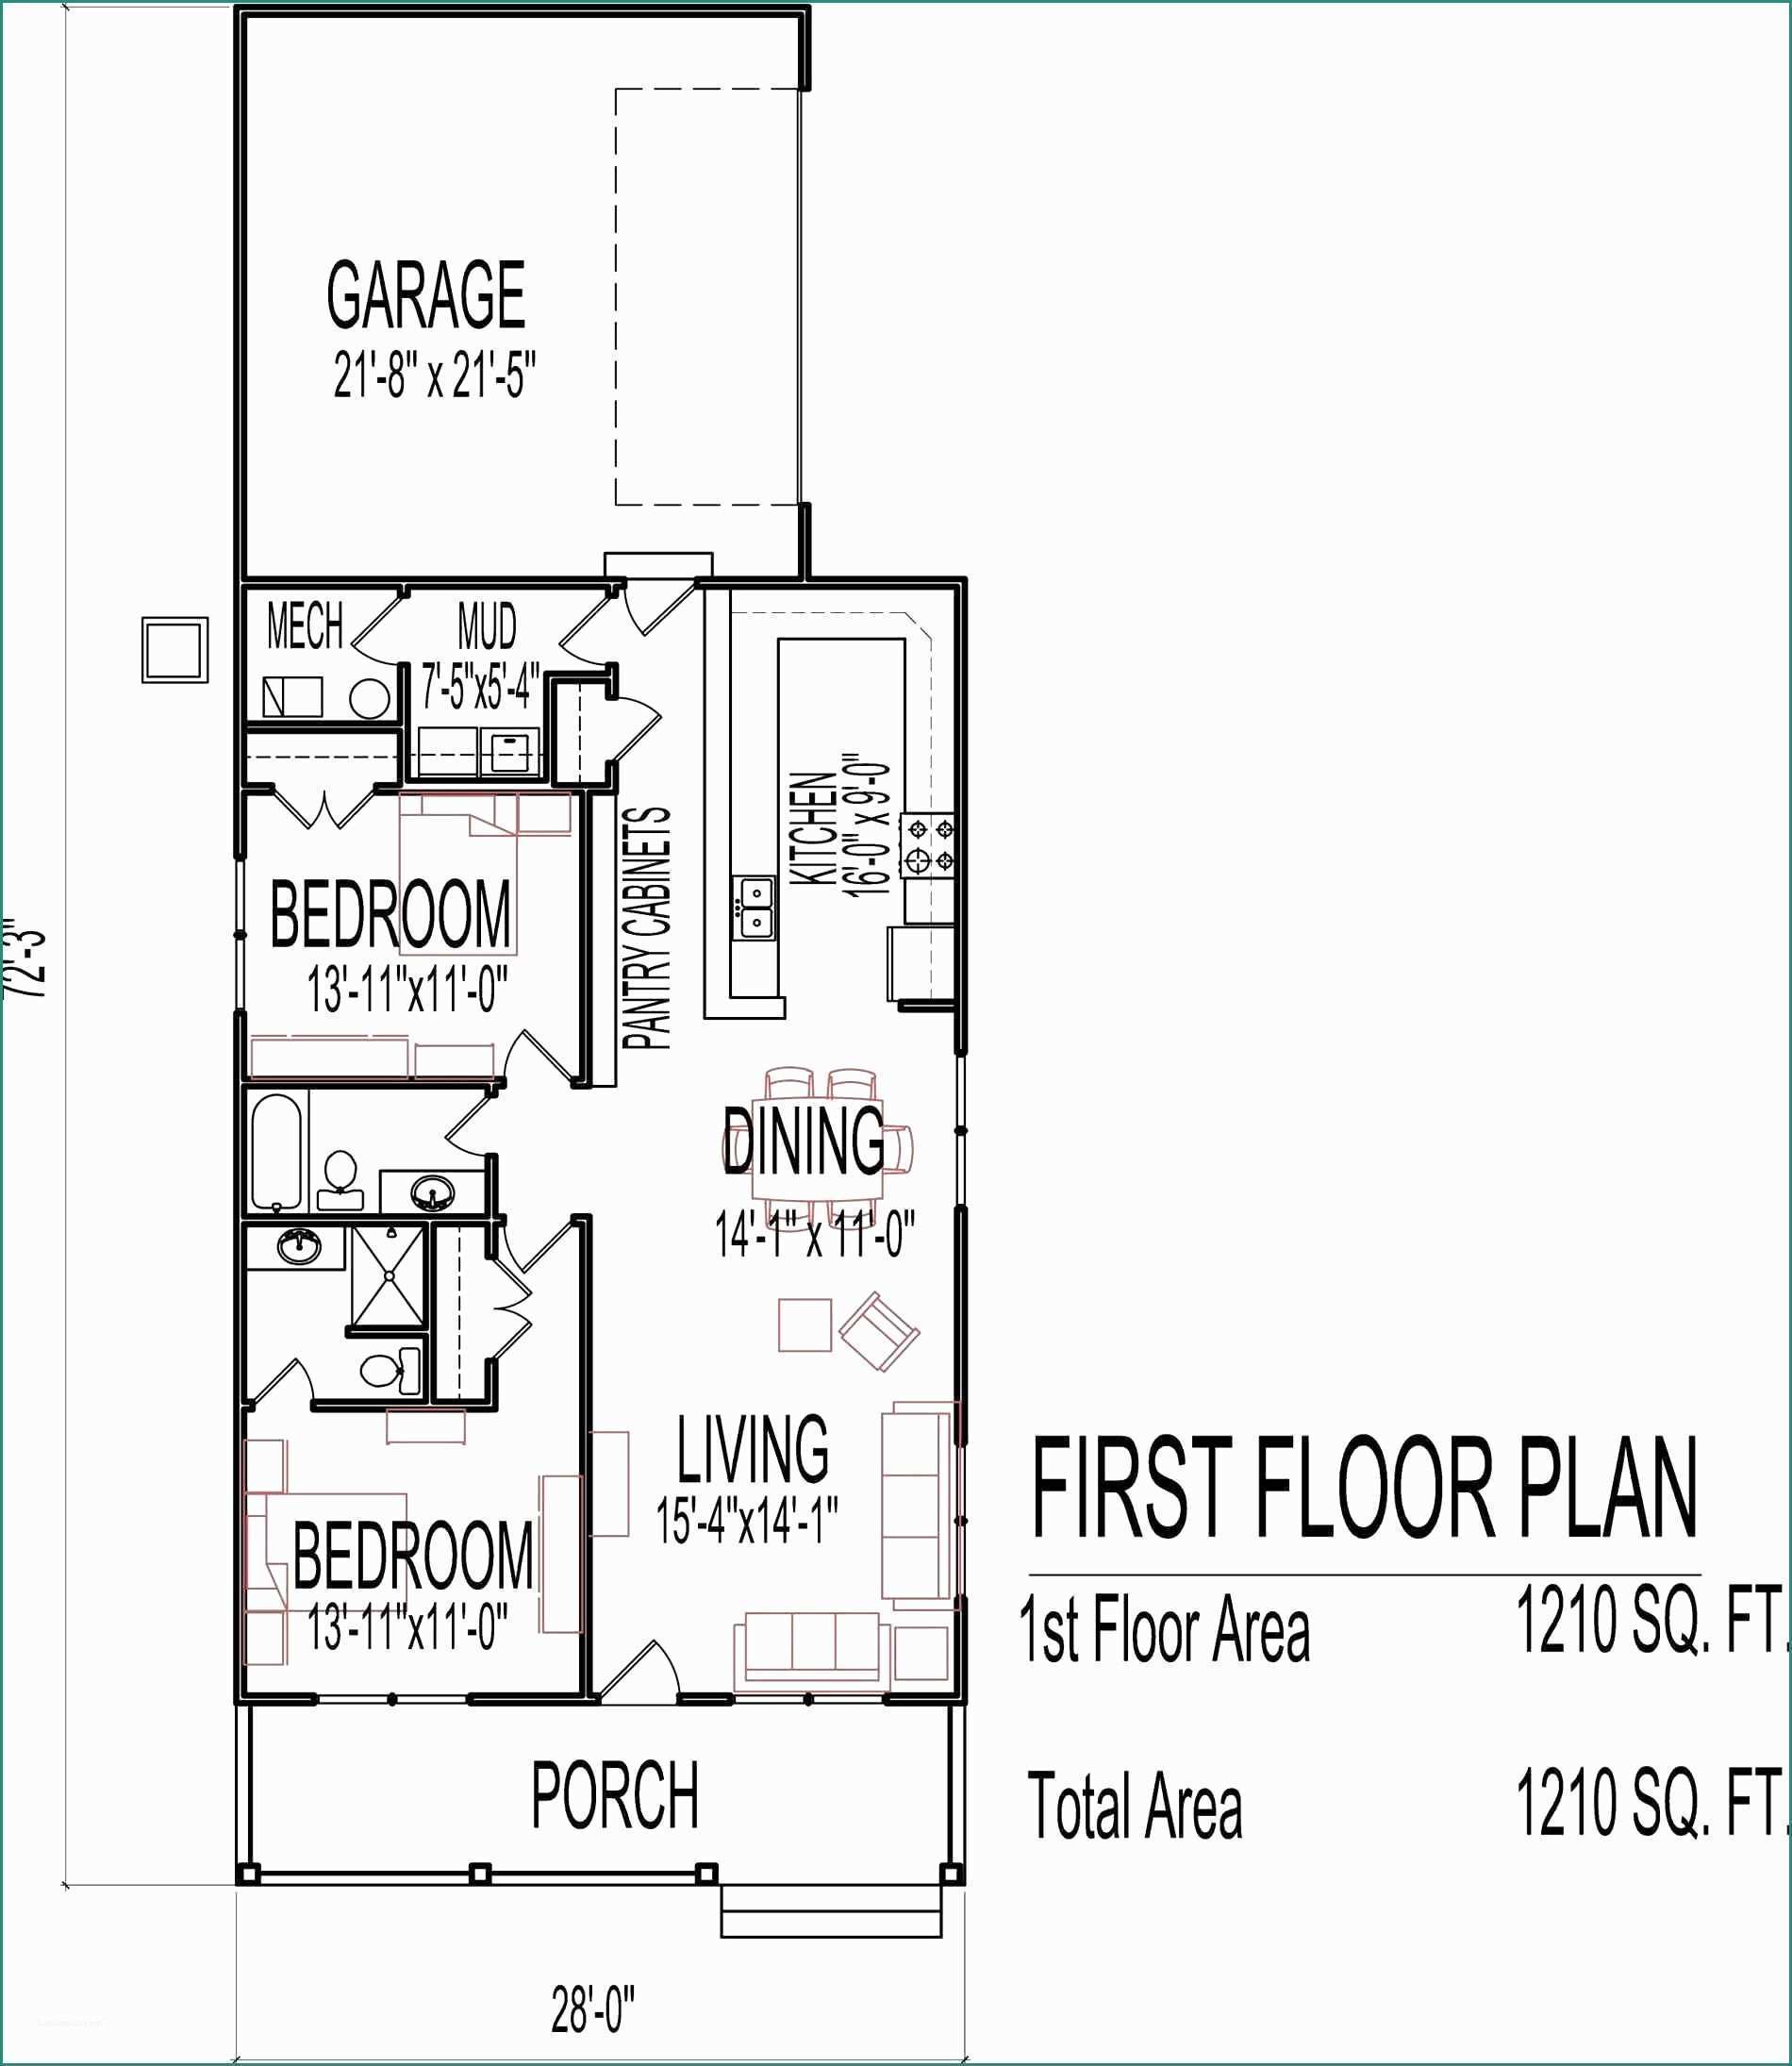 Bagno Disabile Dwg E Autocad House Plans with Dimensions New Bathroom Luxury Handicap